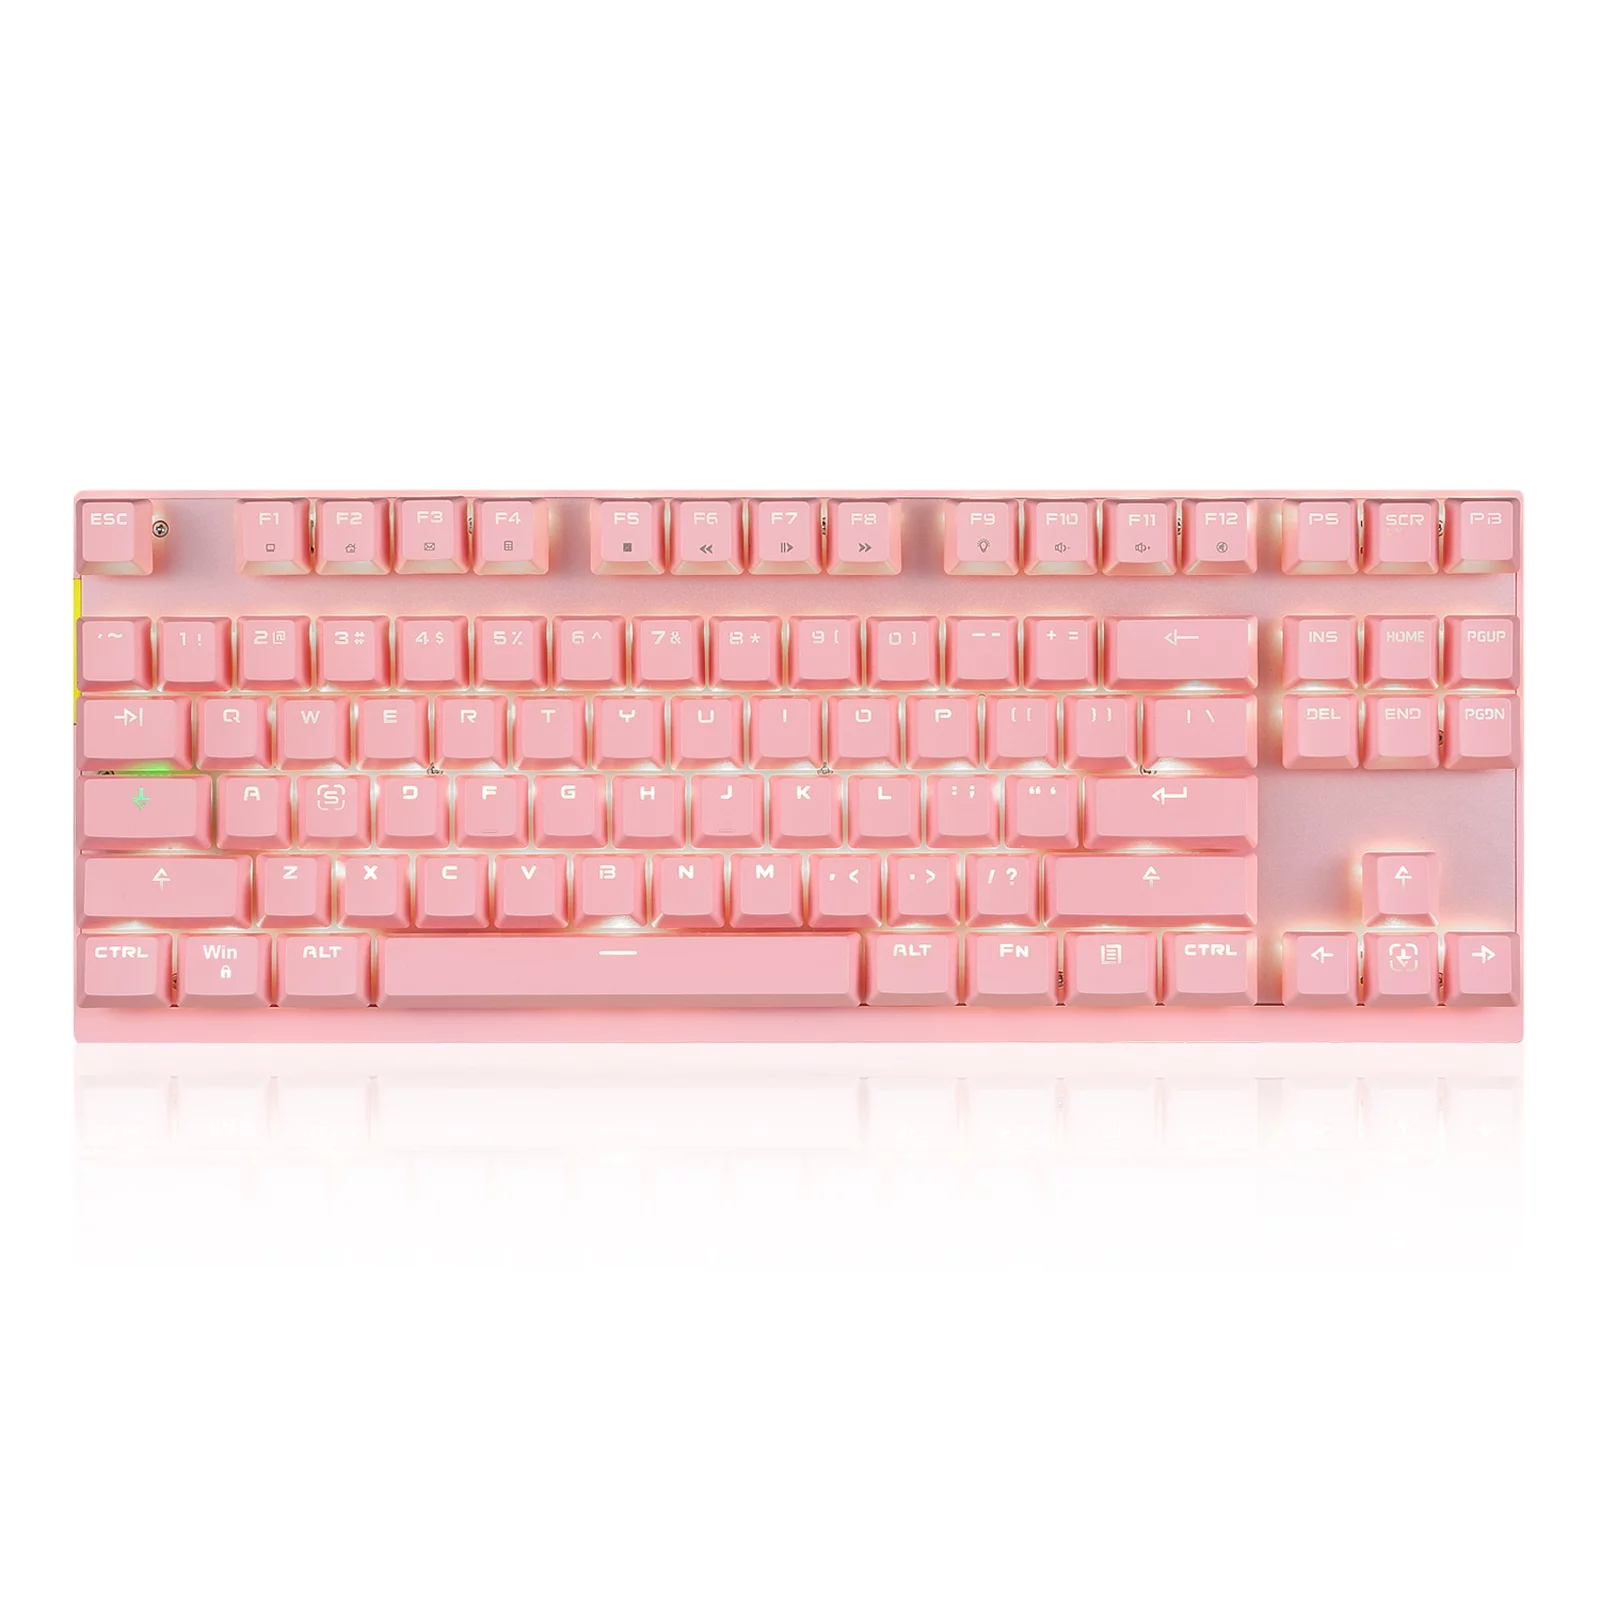 Andoer Motospeed 2.4GHz Wireless/Wired Mechanical Gaming Keyboard White Backlit, Type-C for Mac/PC/Laptop-87 Key Blue Switches in Pink